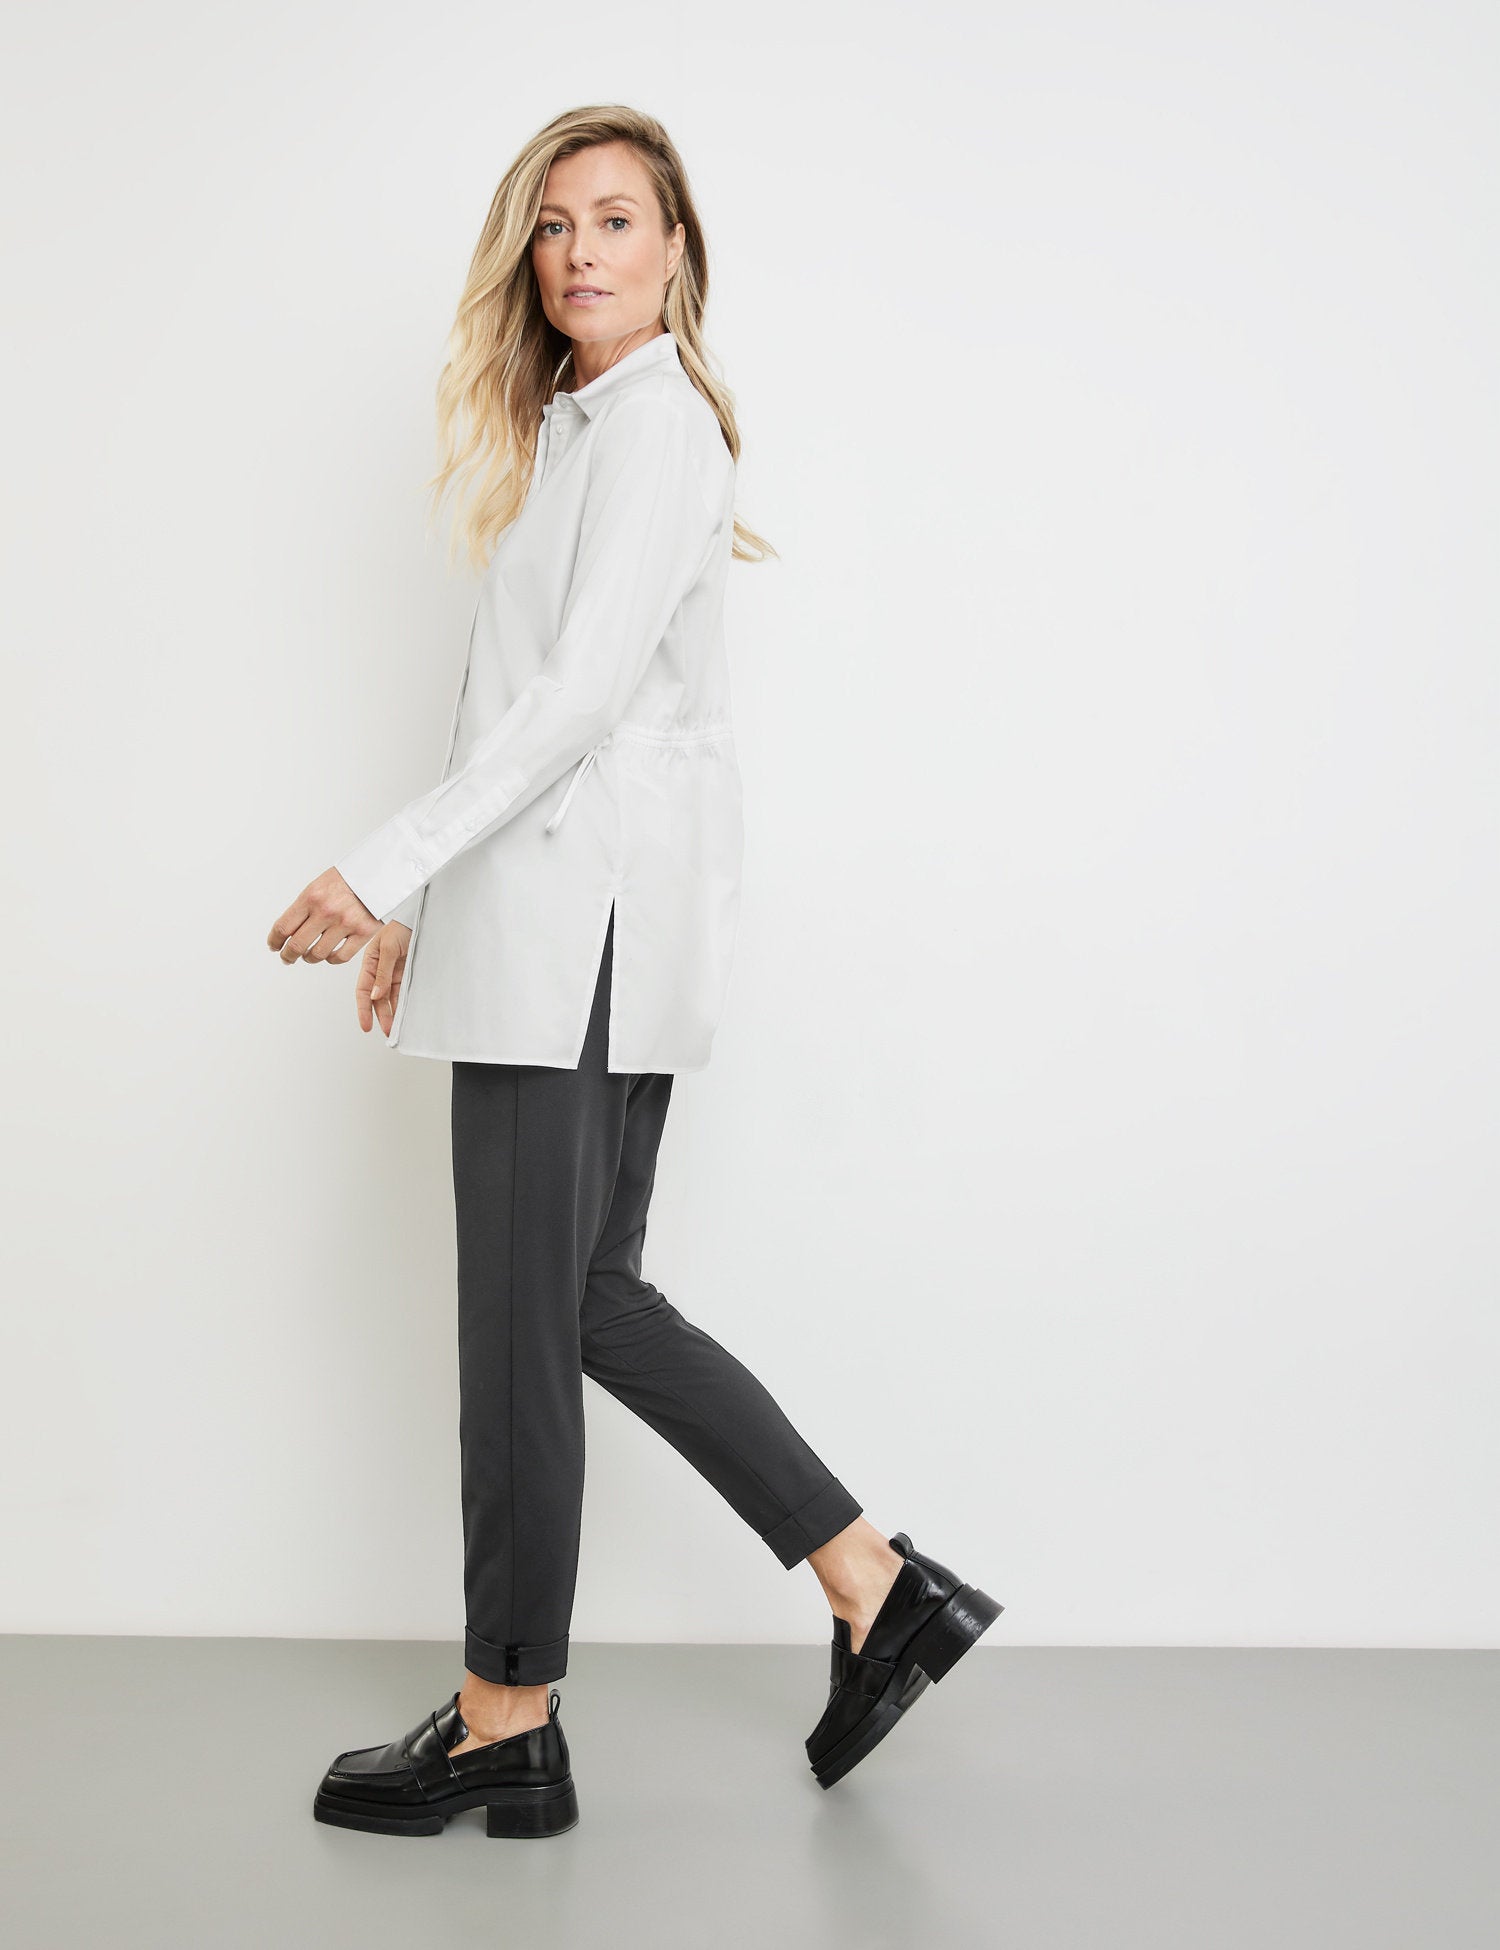 Classic Long Blouse With Side Slits And Gathers_160048-66401_99600_05